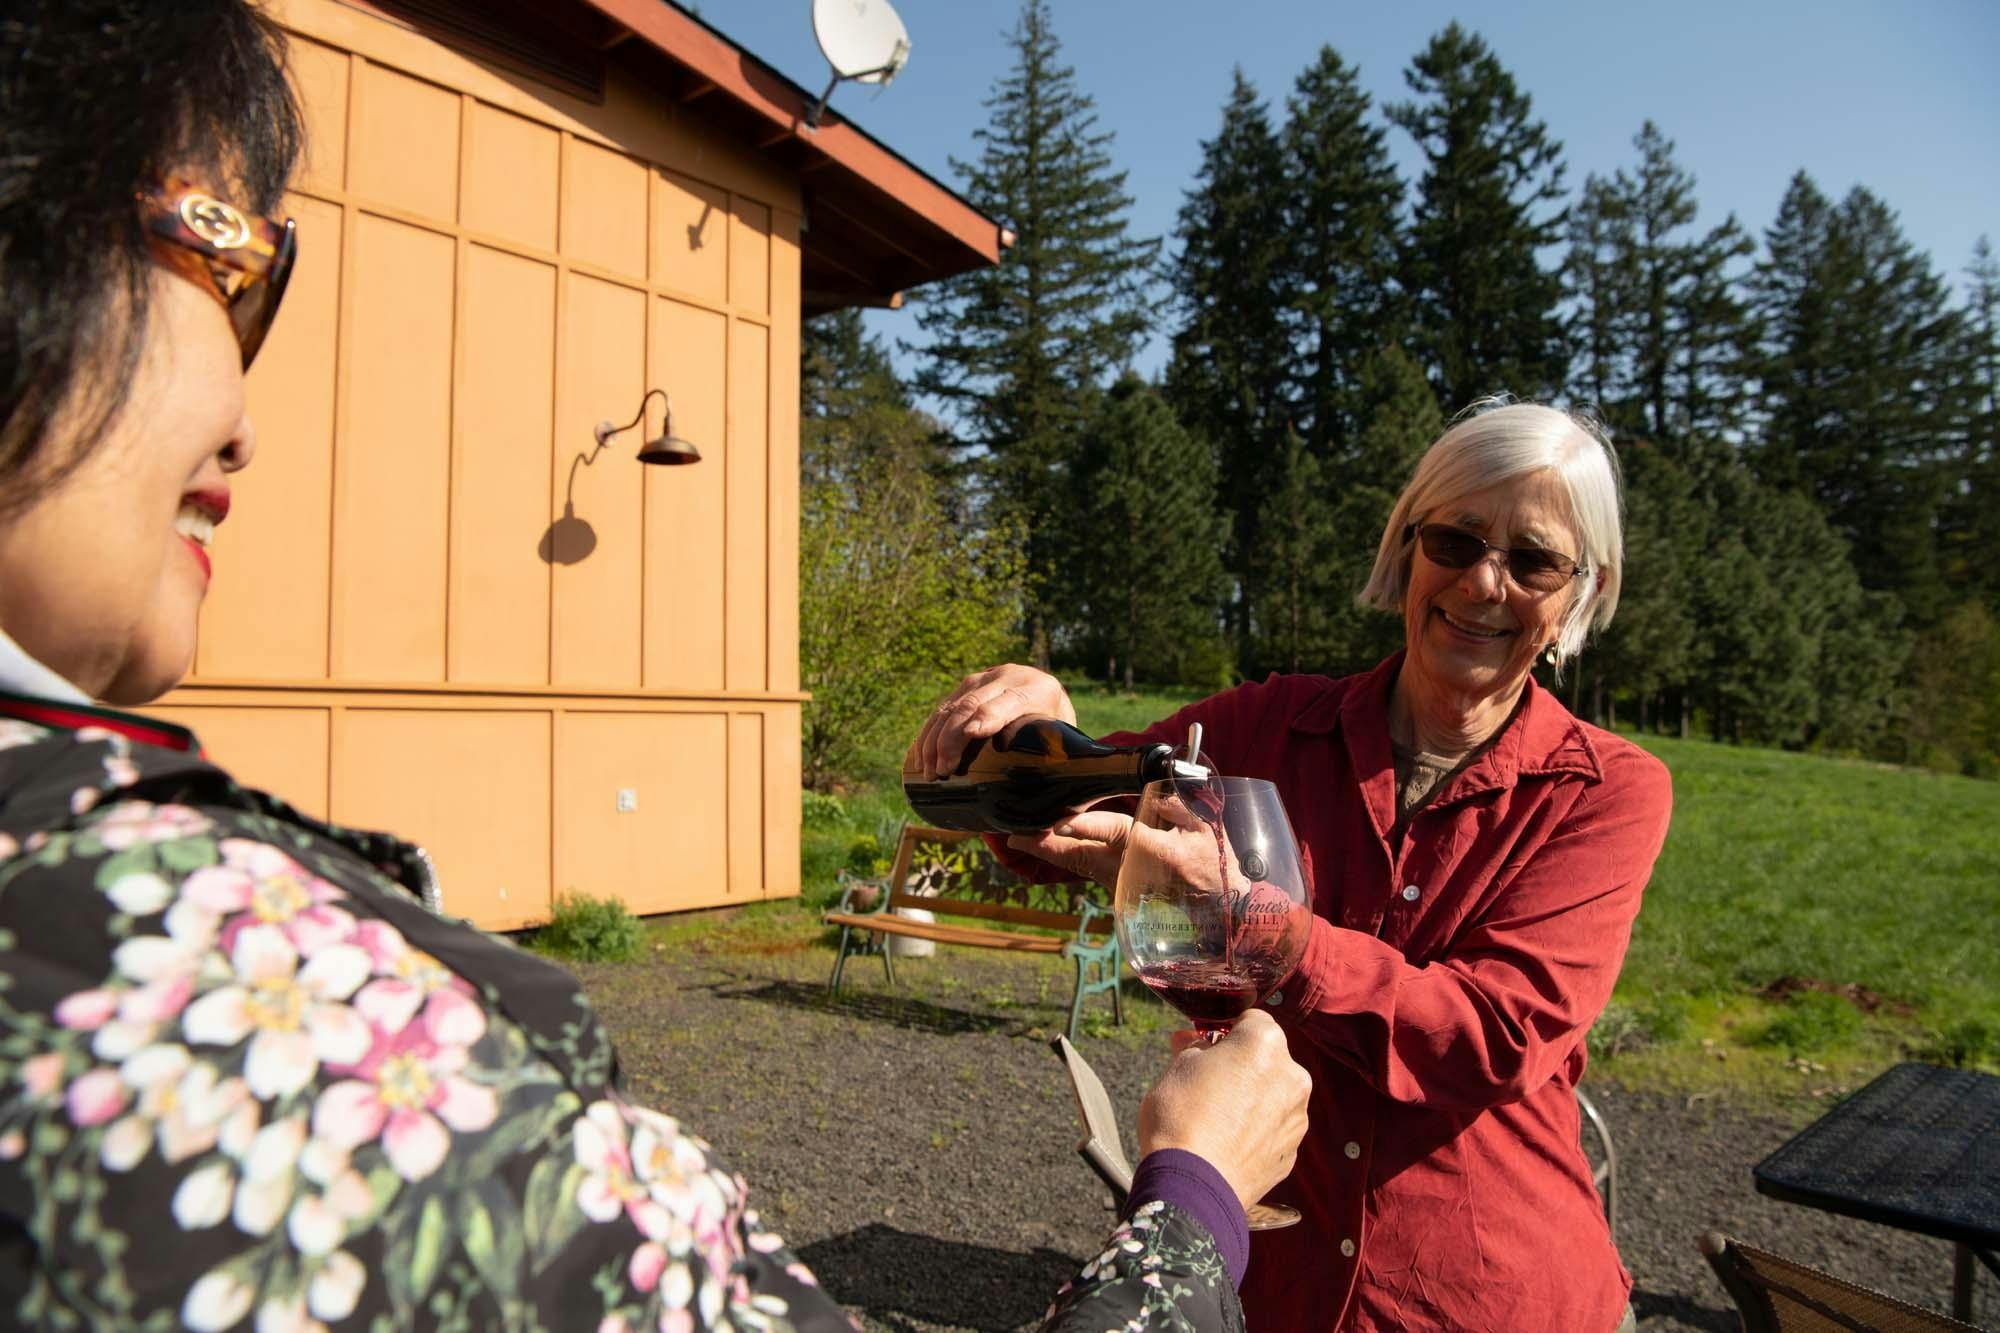 Owner of Winter's Hill Winery, Emily Gladhart, pouring wine for guests,  Dayton, Oregon